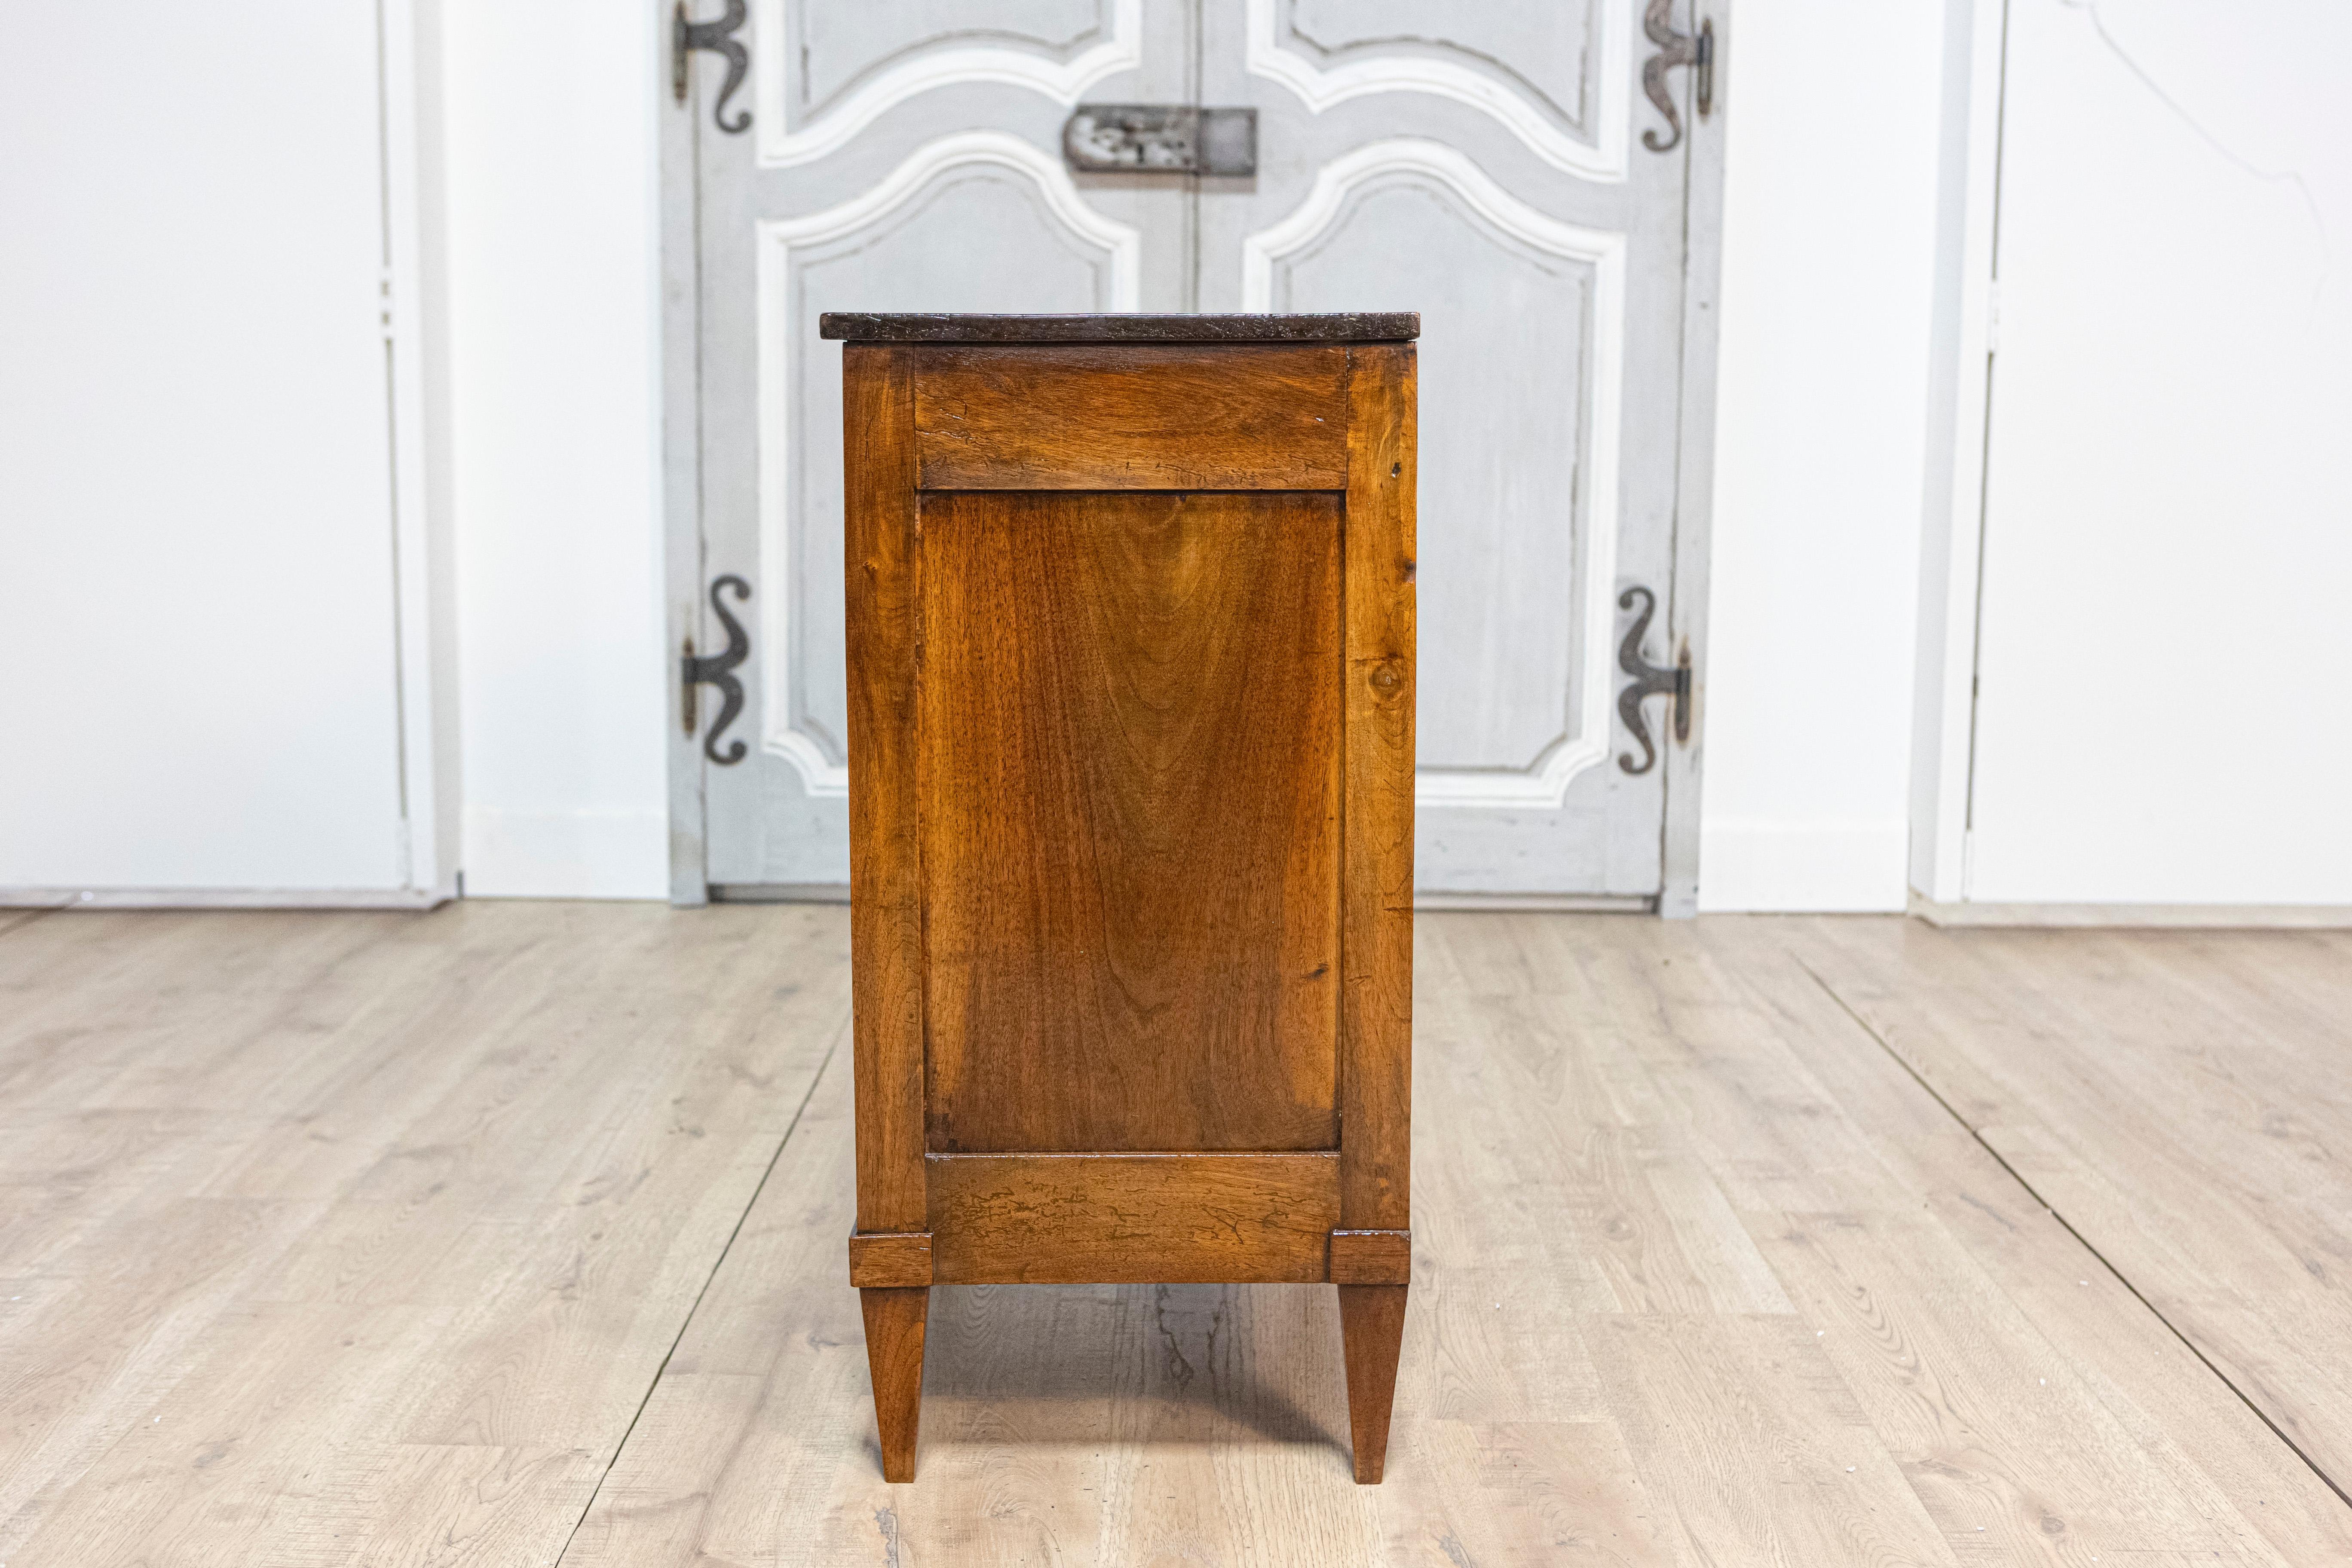 Italian Directoire Period Late 18th Century Three Drawer Walnut Bedside Chest For Sale 4